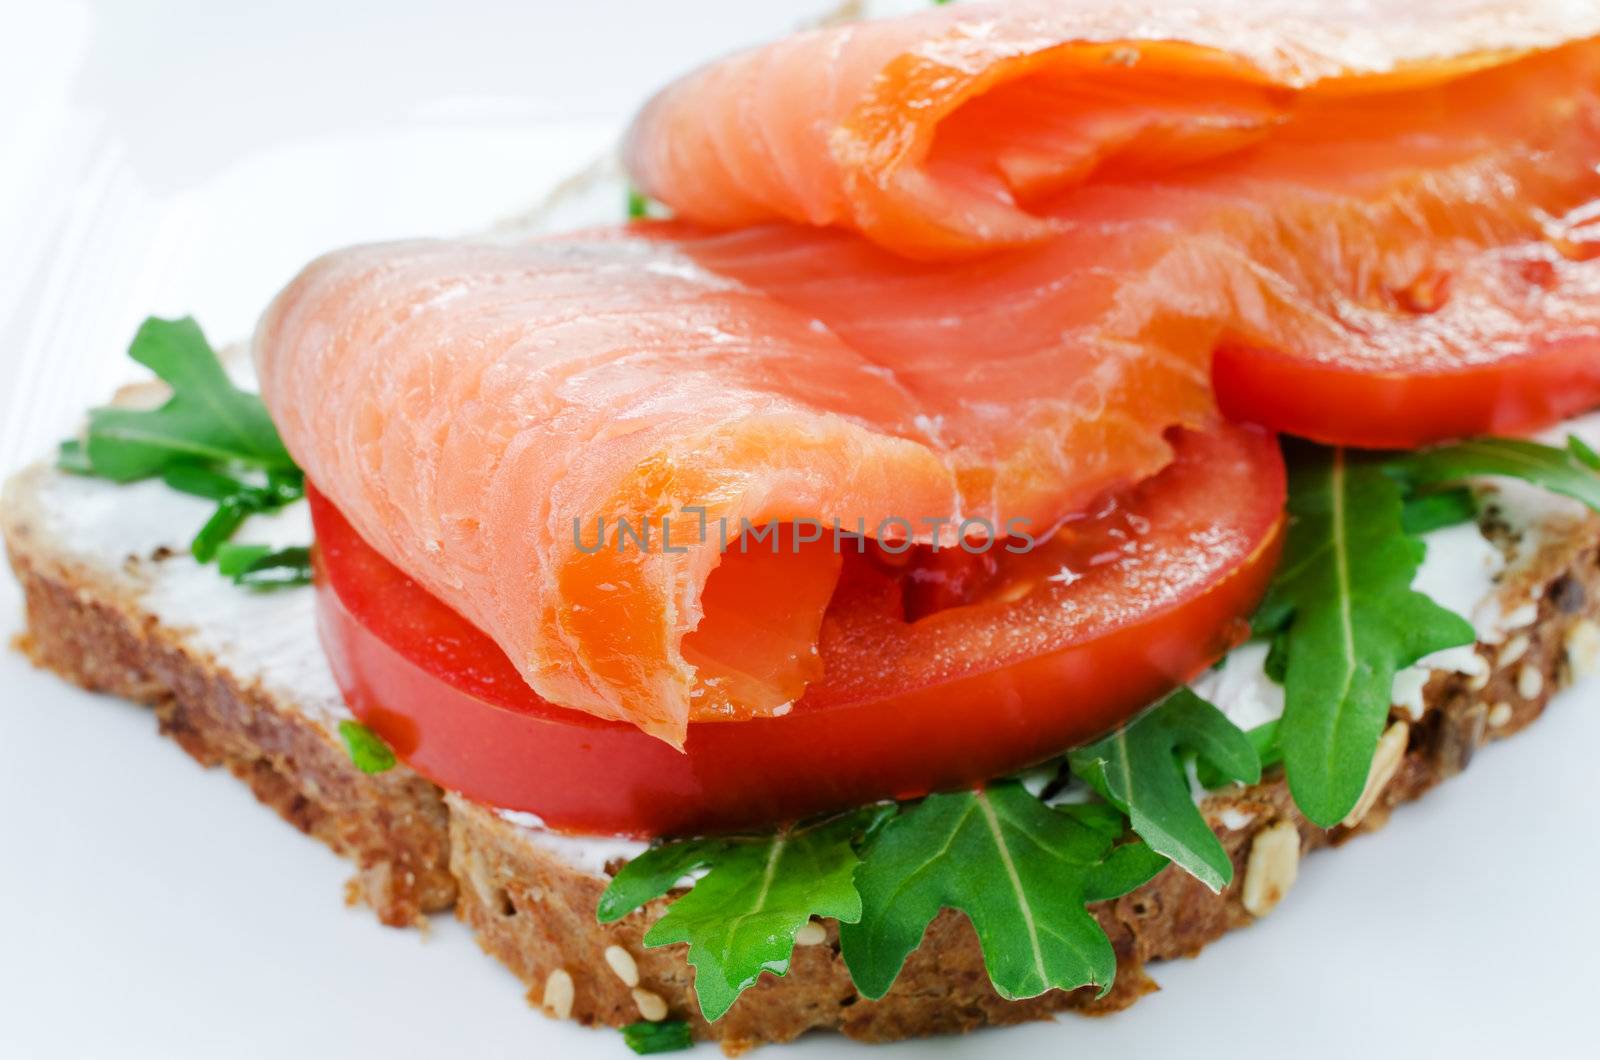 Smoked salmon sandwich with tomato and rucola on rye bread